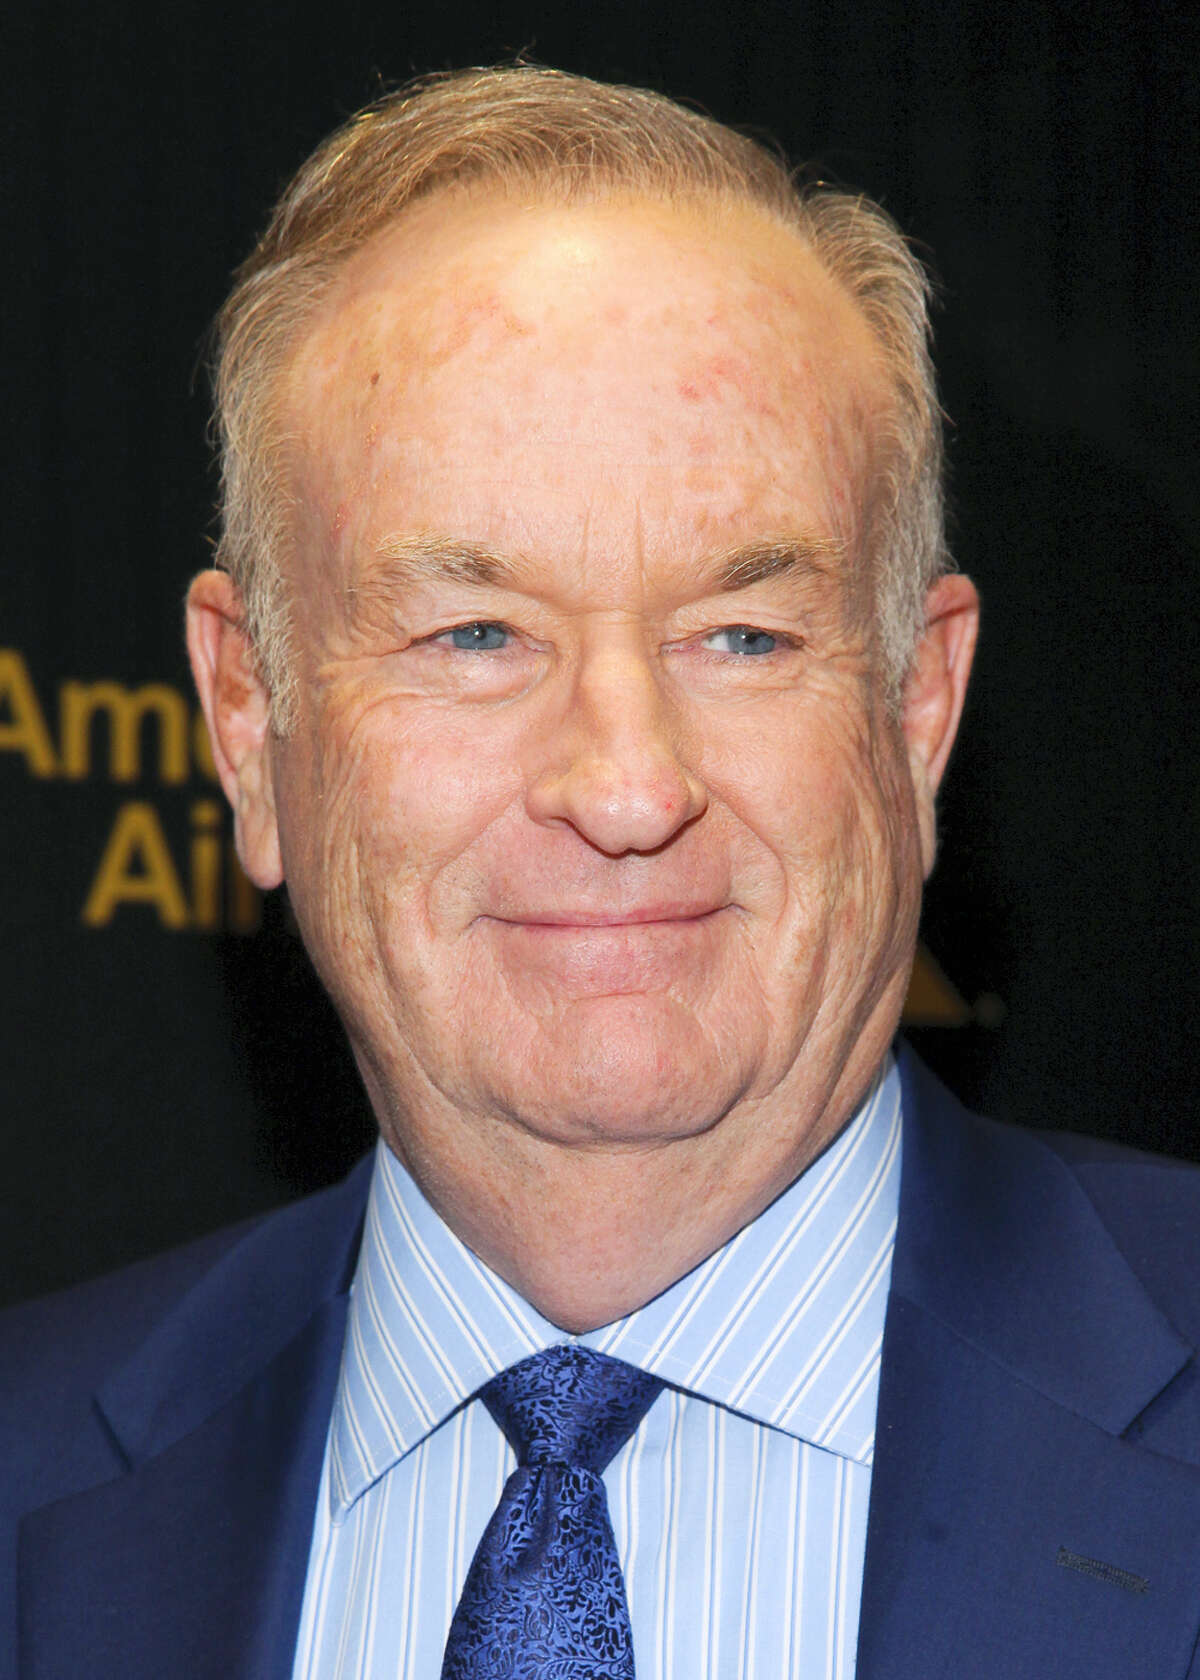 In this file photo, Bill O’Reilly attends The Hollywood Reporter’s “35 Most Powerful People in Media” celebration in New York. 21st Century Fox issued a statement Wednesday that O’Reilly will not return to Fox News.